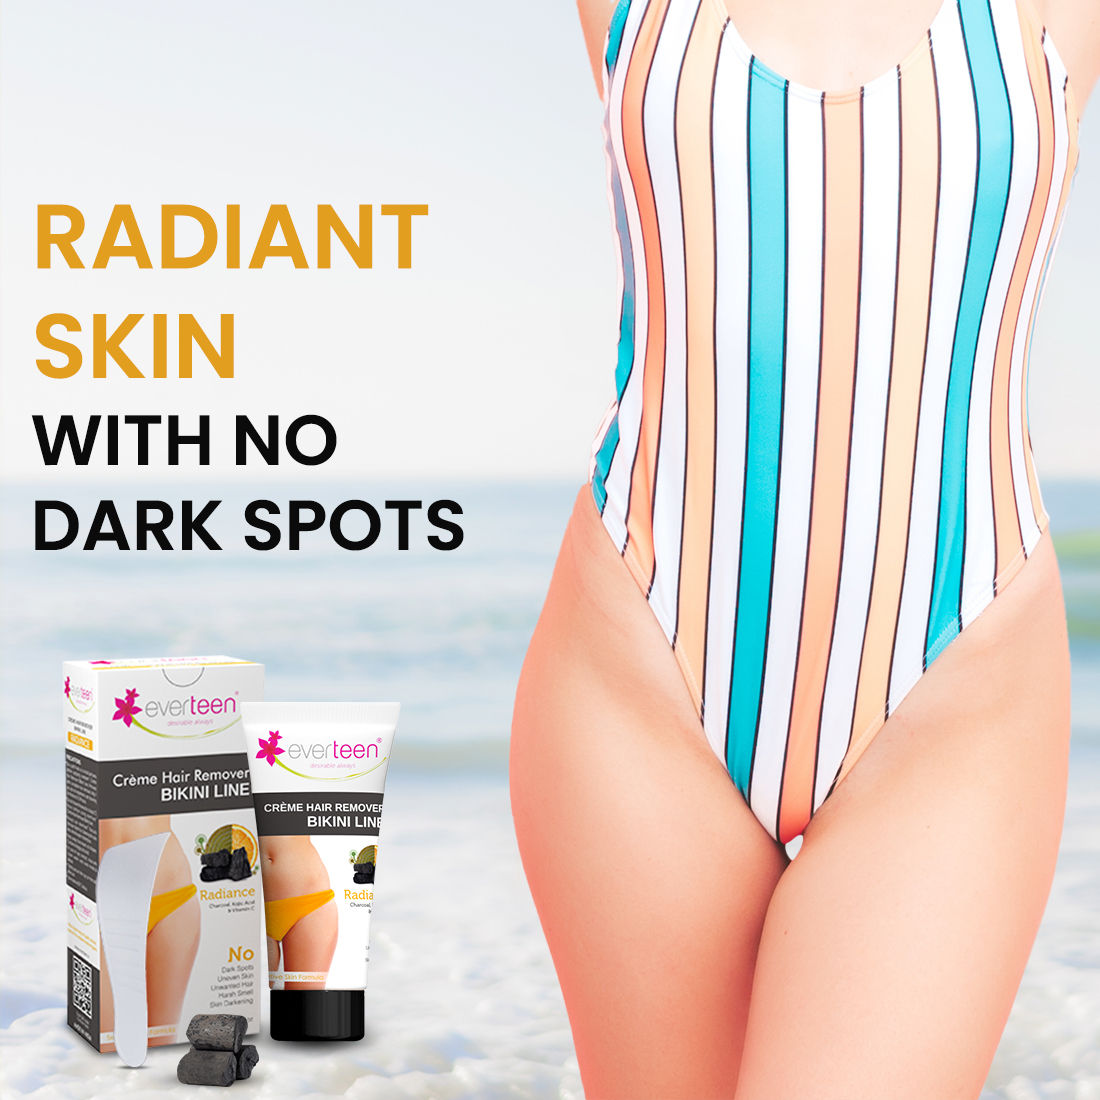 Buy everteen RADIANCE Hair Removal Cream with Charcoal, Kojic Acid and Vitamin C for Bikini Line & Underarms in Women and Girls | No Harsh Smell, Skin Darkening or Rashes | 1 Pack 50 g with Spatula and Coin Tissues - Purplle